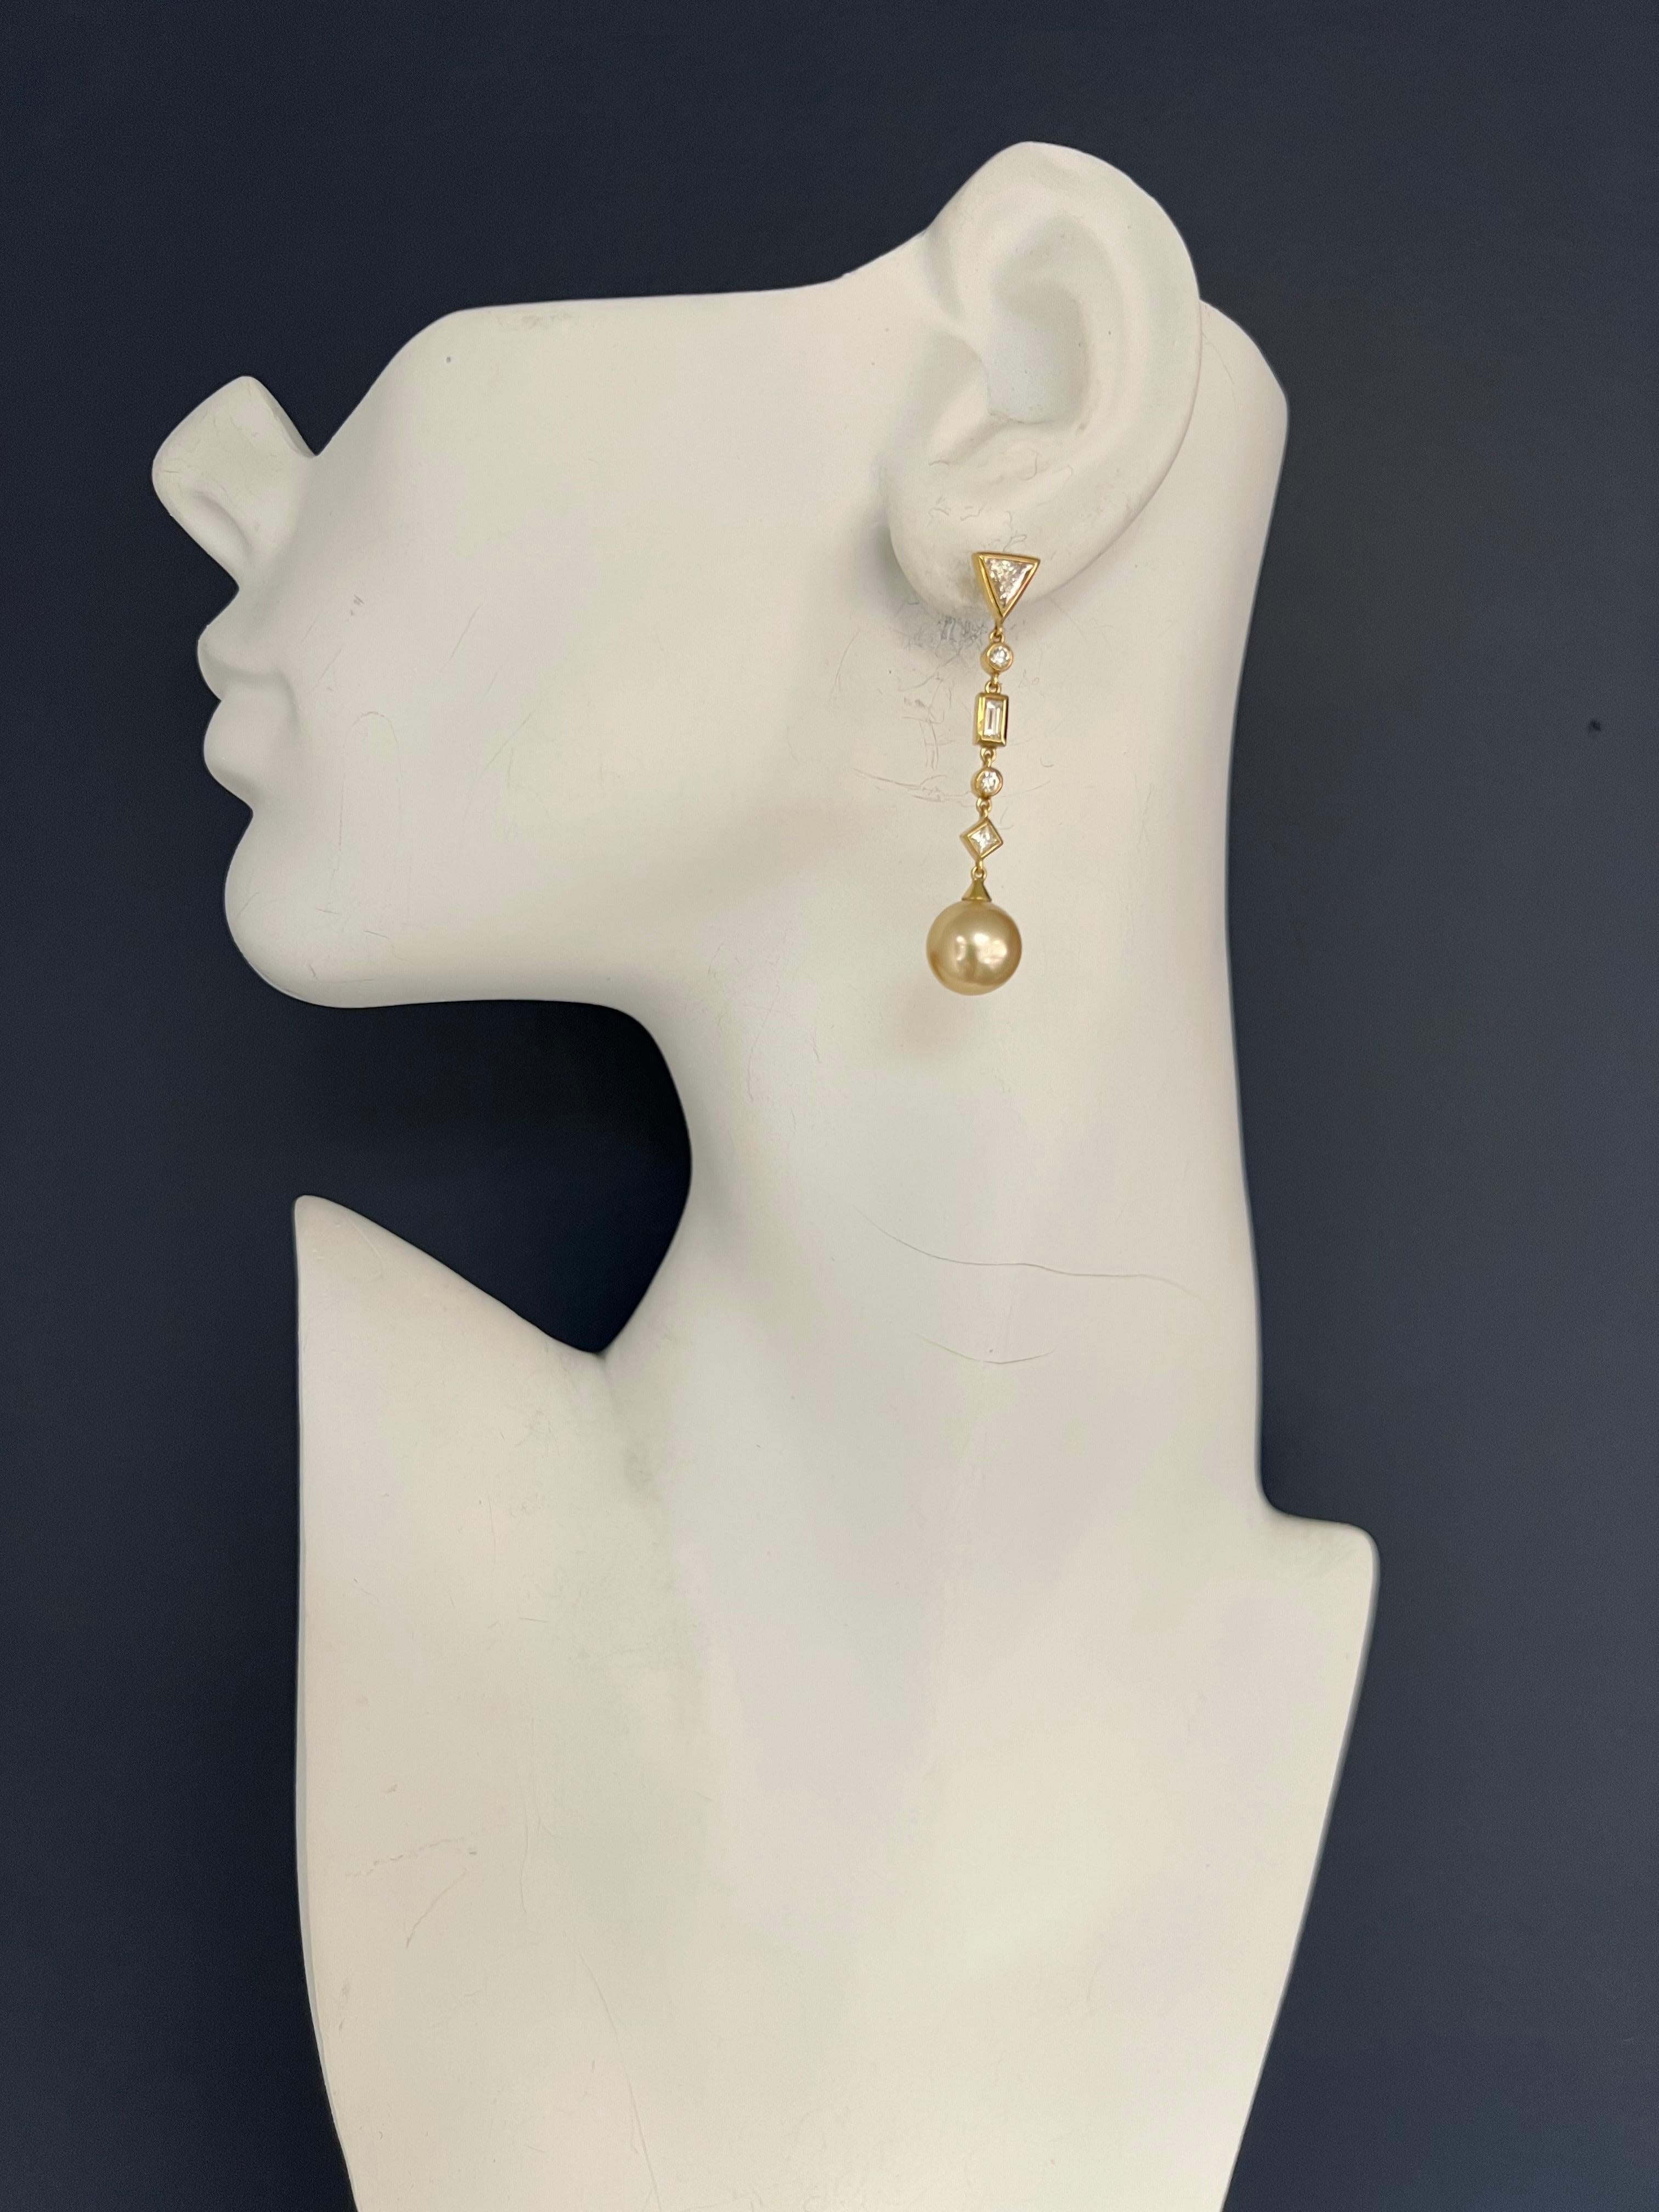 Modern gold 2 carat natural diamond and golden south sea pearl earrings

Magnificent yellow gold pearl earrings set with two 10.5 mm aaa quality golden south sea pearls. Very high luster, golden color and very thick nacre. The ten natural diamonds